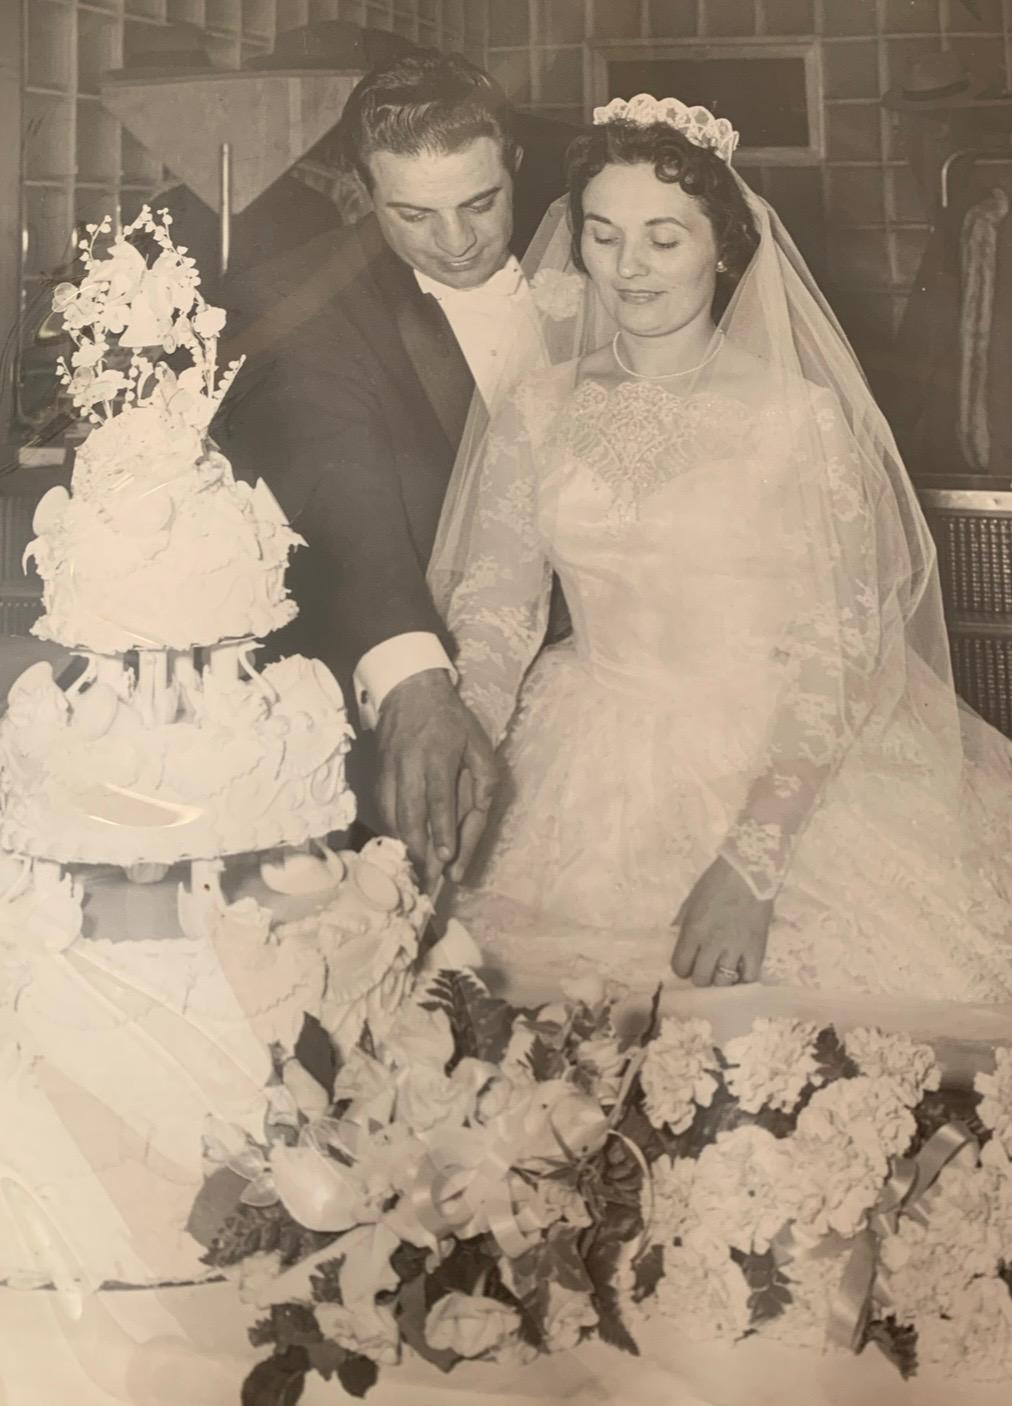 Mr. and Ms. Leo tied the knot on Oct. 31, 1959. (Courtesy of Rose Chodnicki)